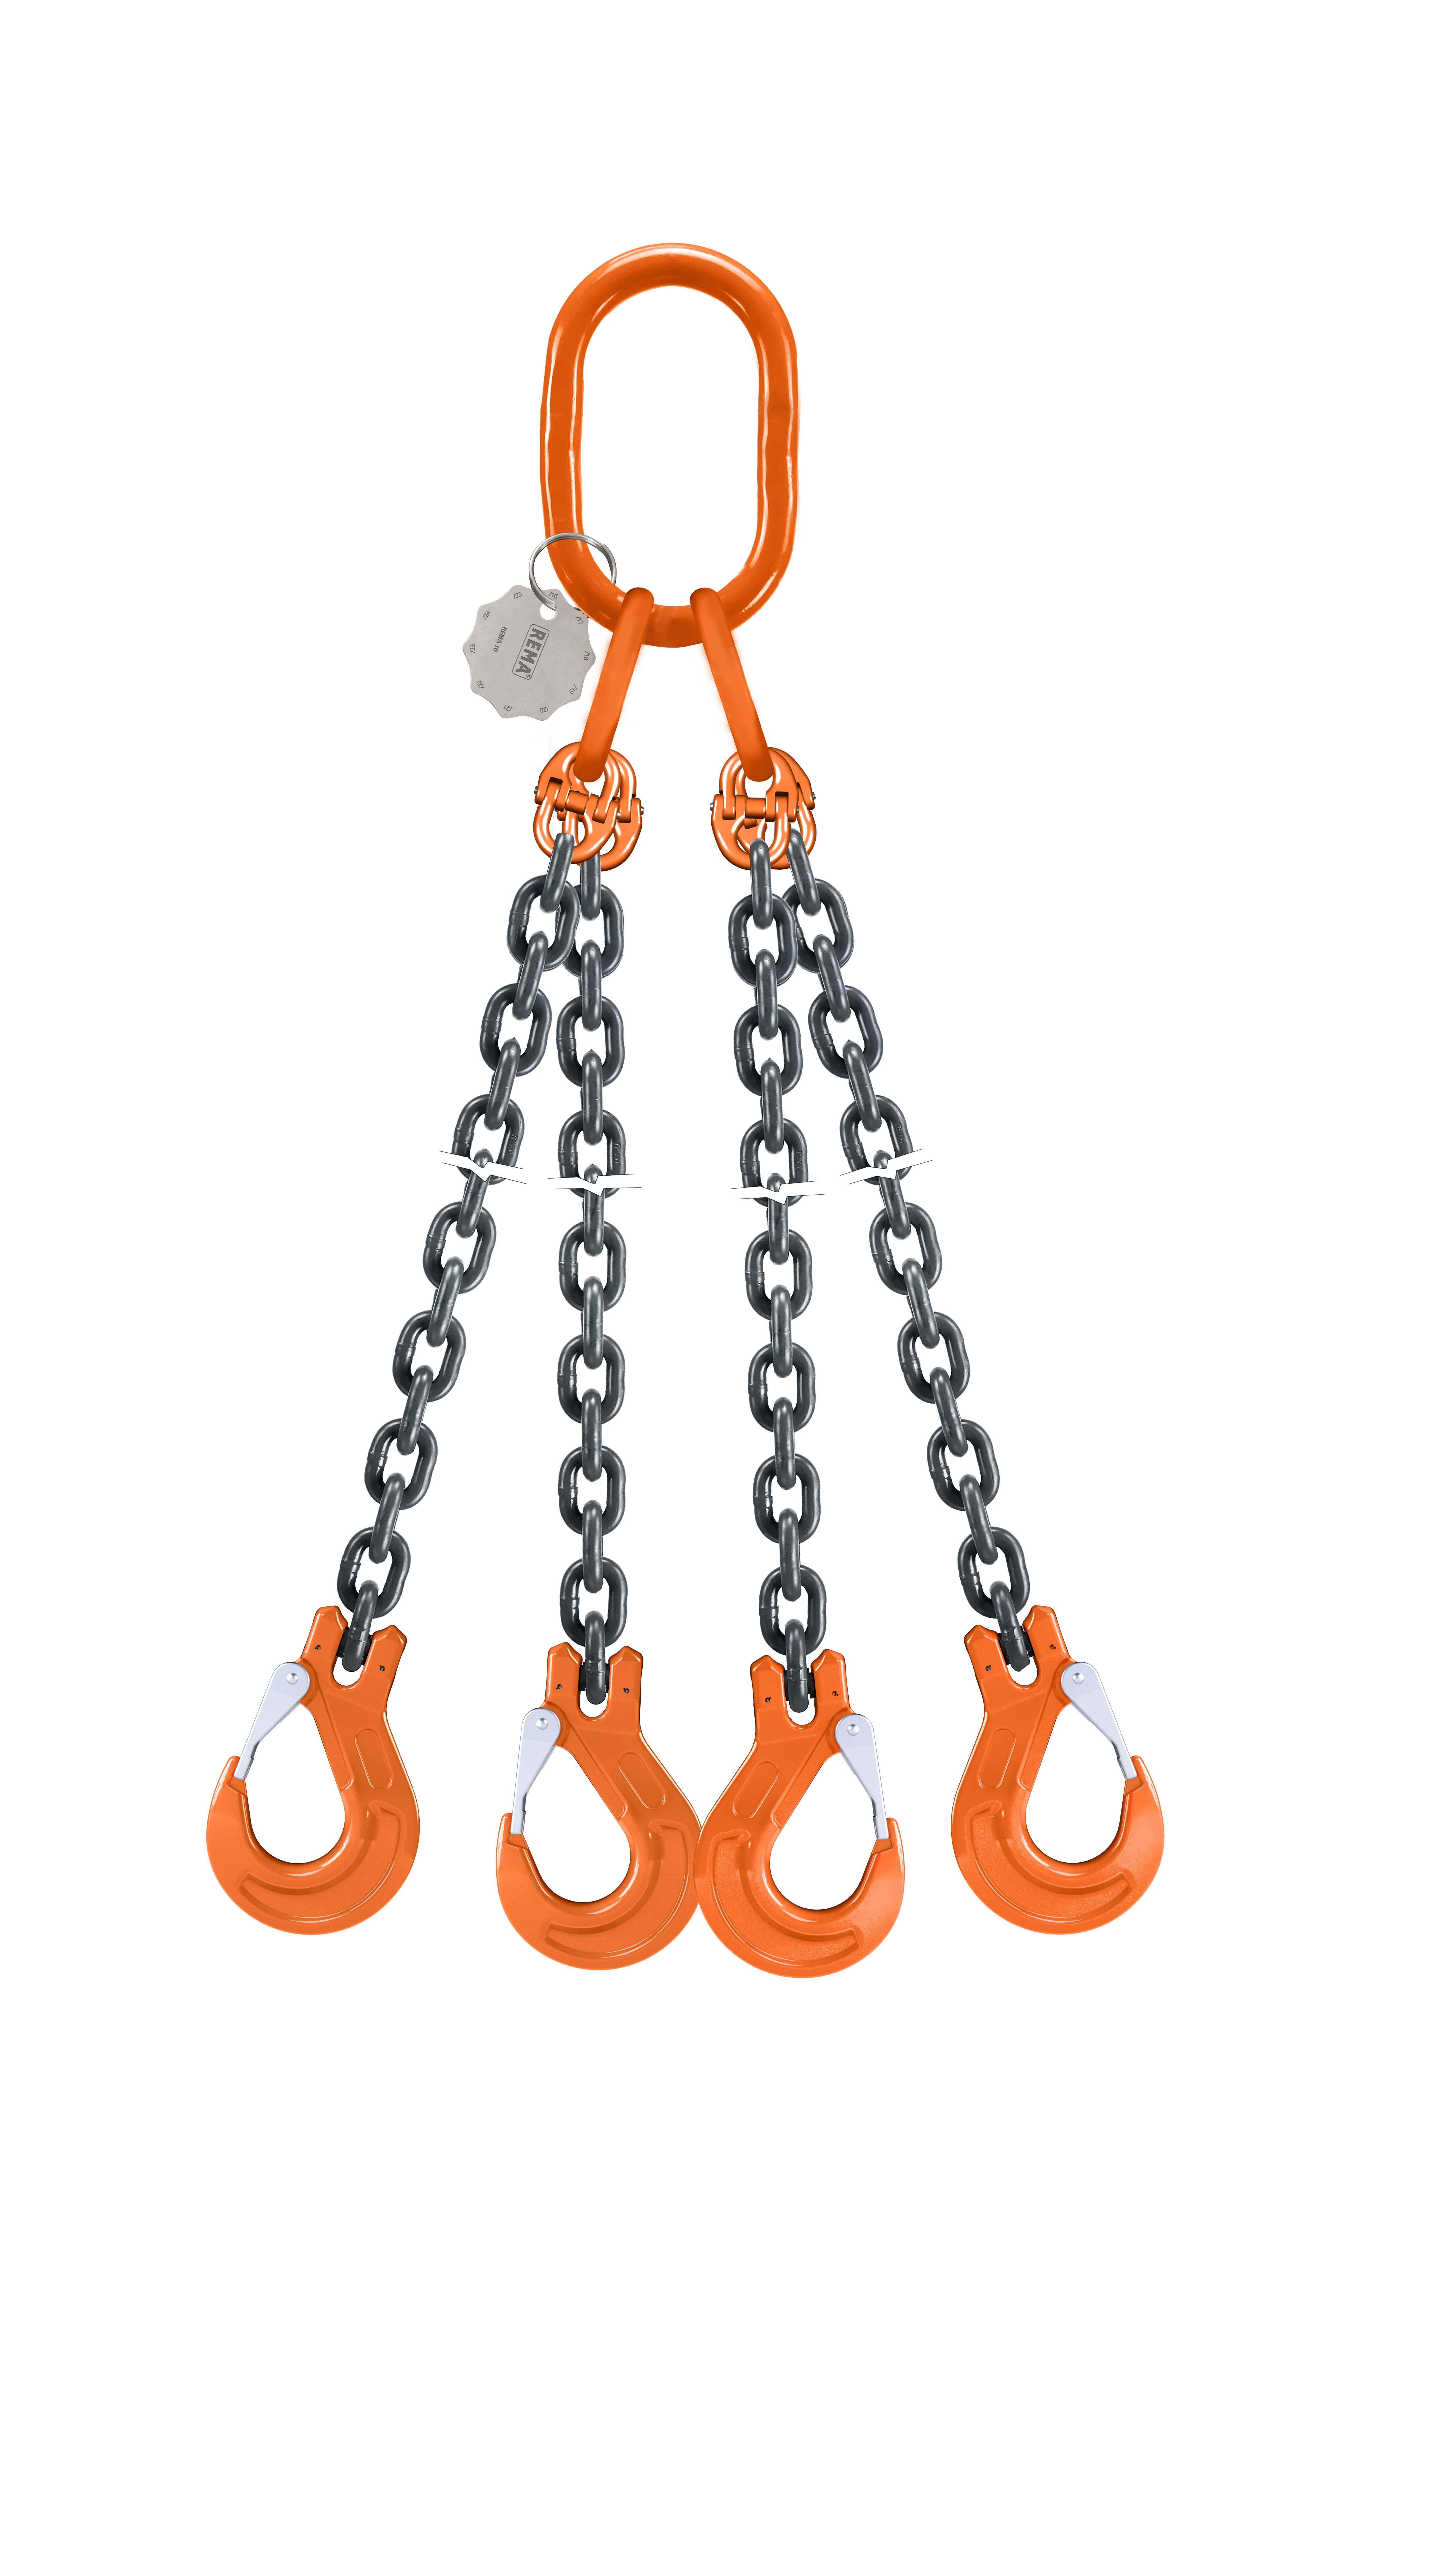 Four Leg Slings: Used for larger, bulkier loads that require multiple lift points for stability.